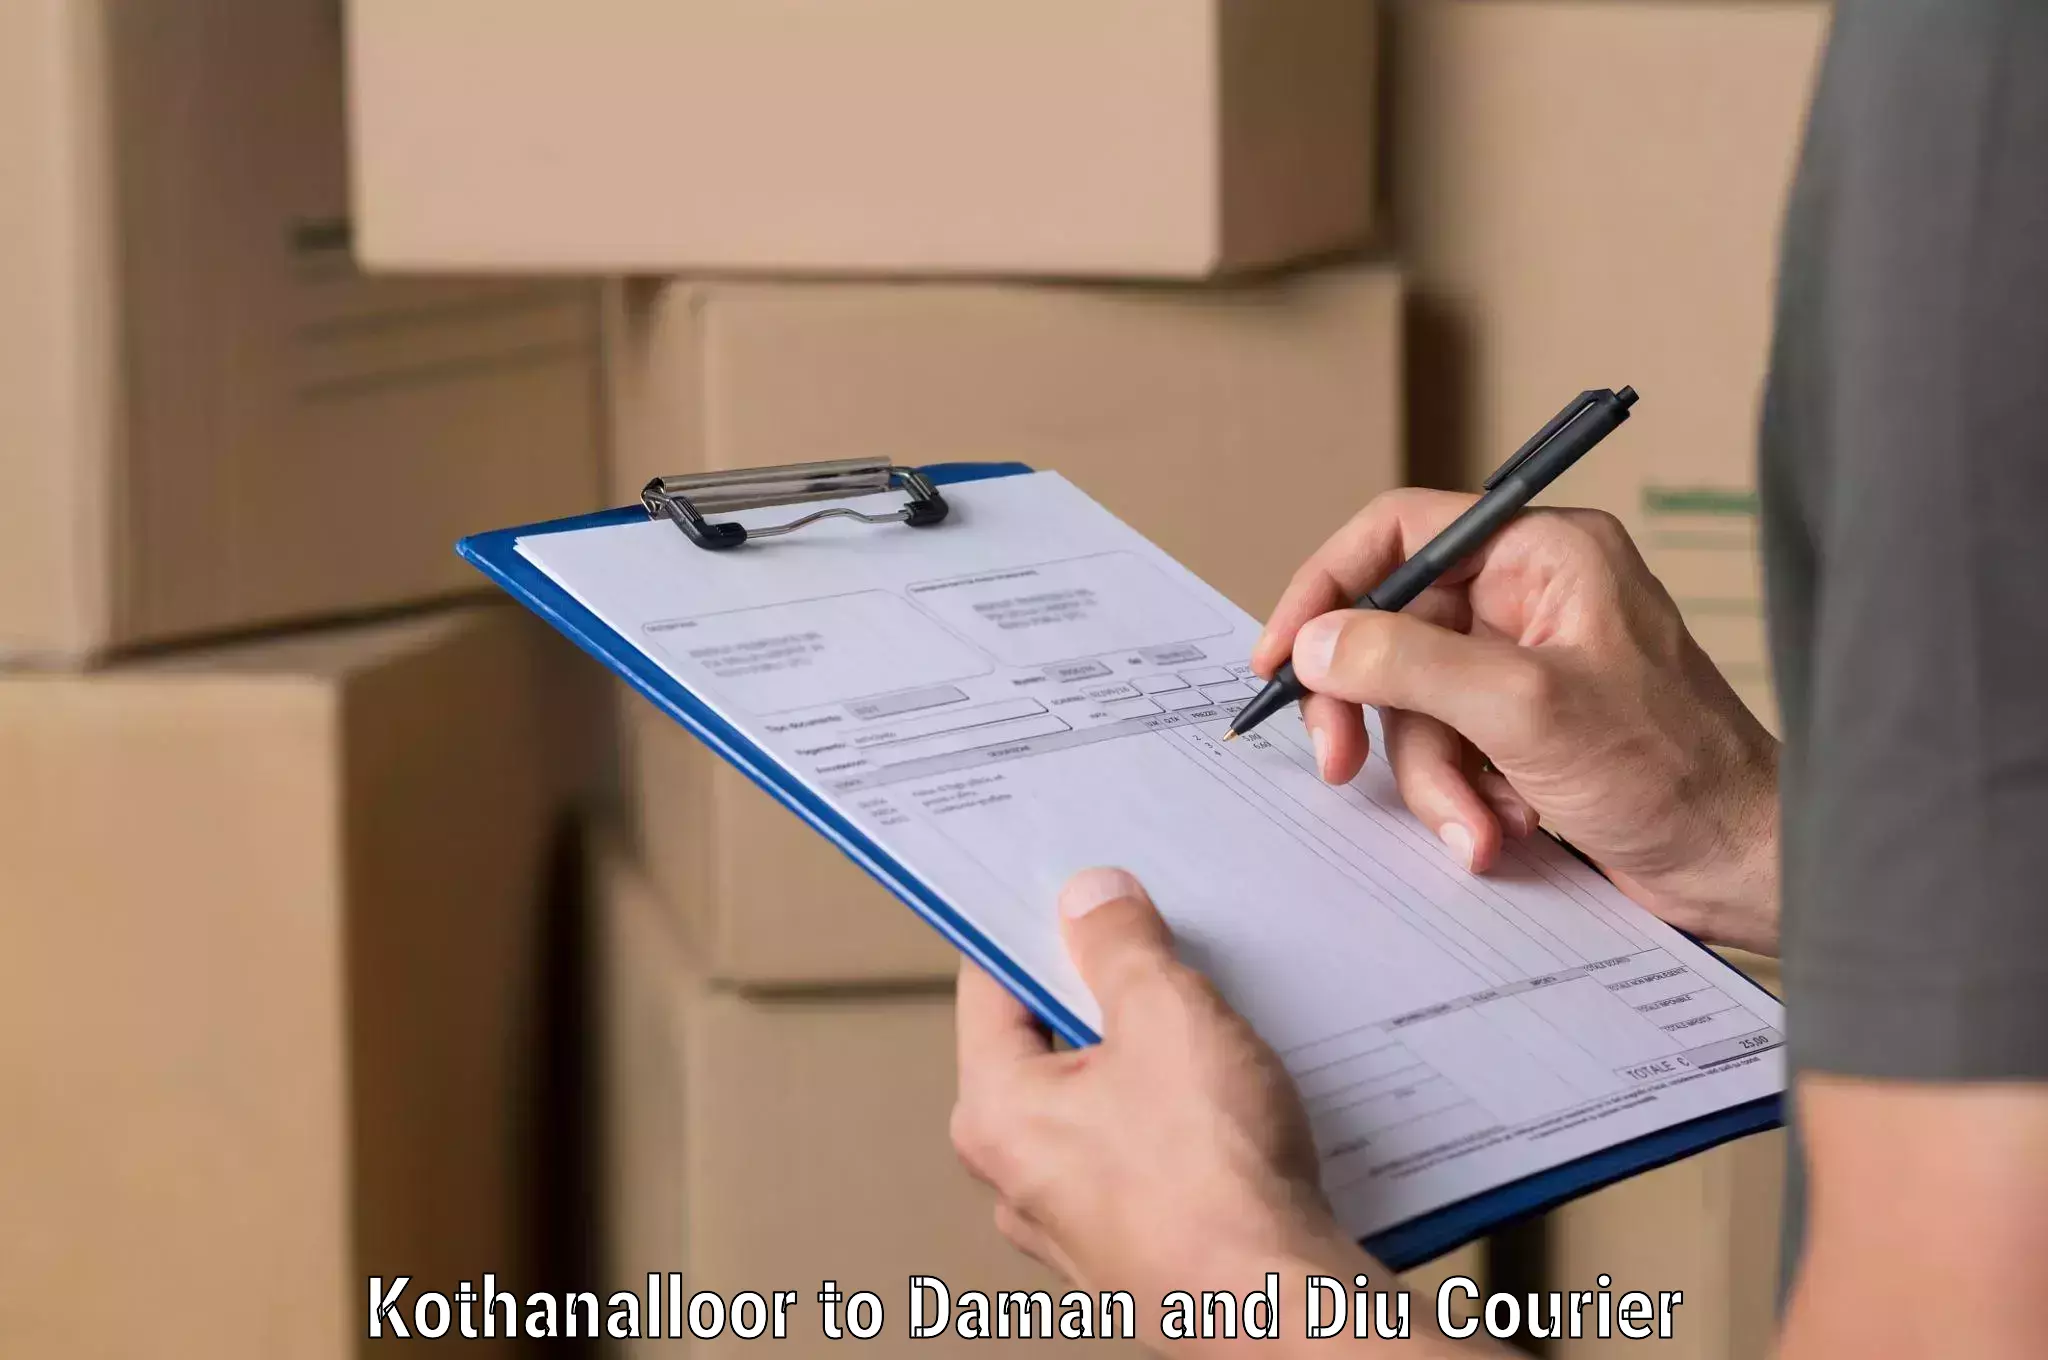 Courier service innovation Kothanalloor to Diu